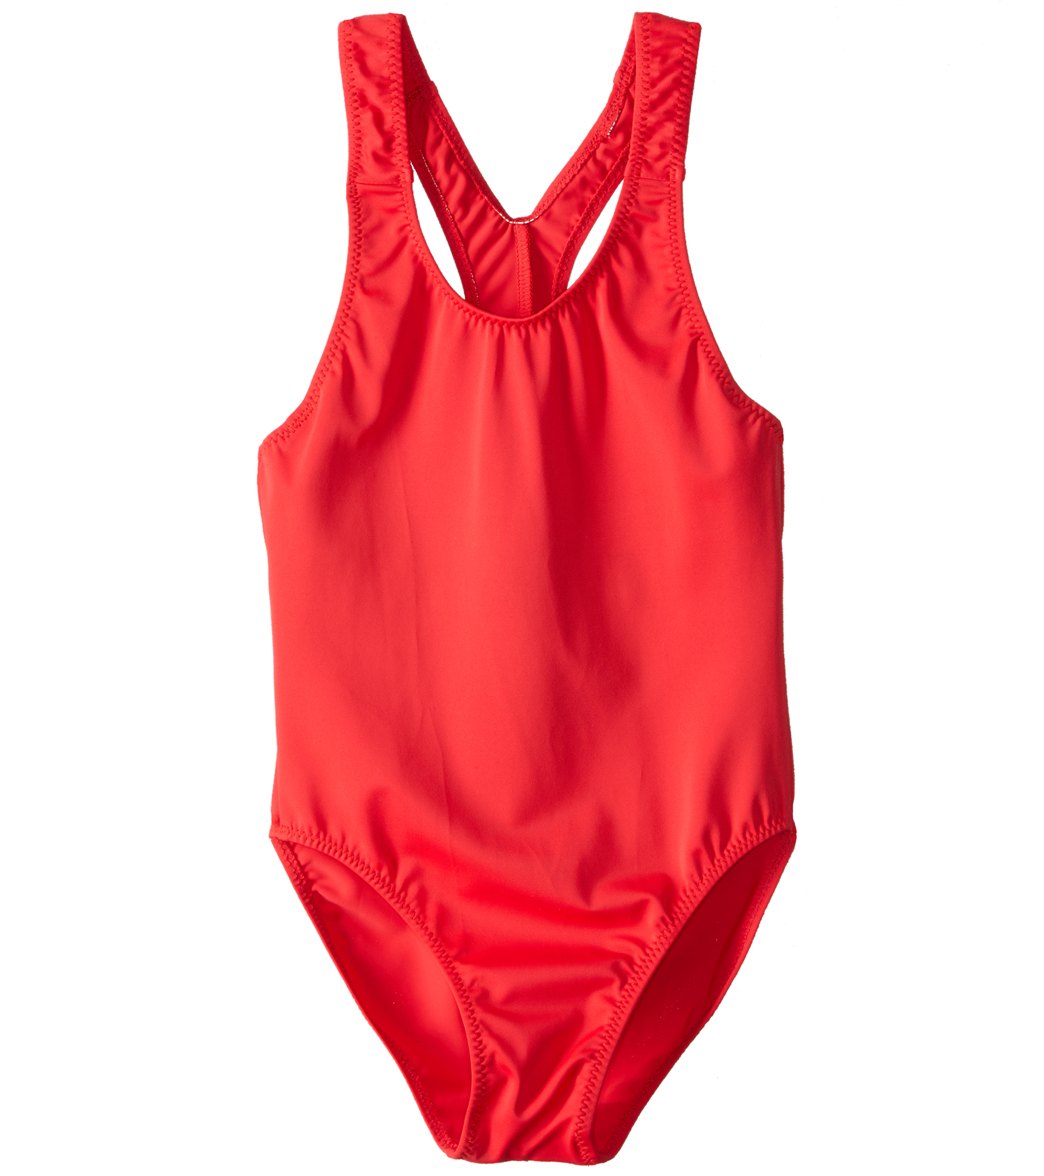 Tidepools Girls Solid Racer Back One Piece Swimsuit (Big Kid)